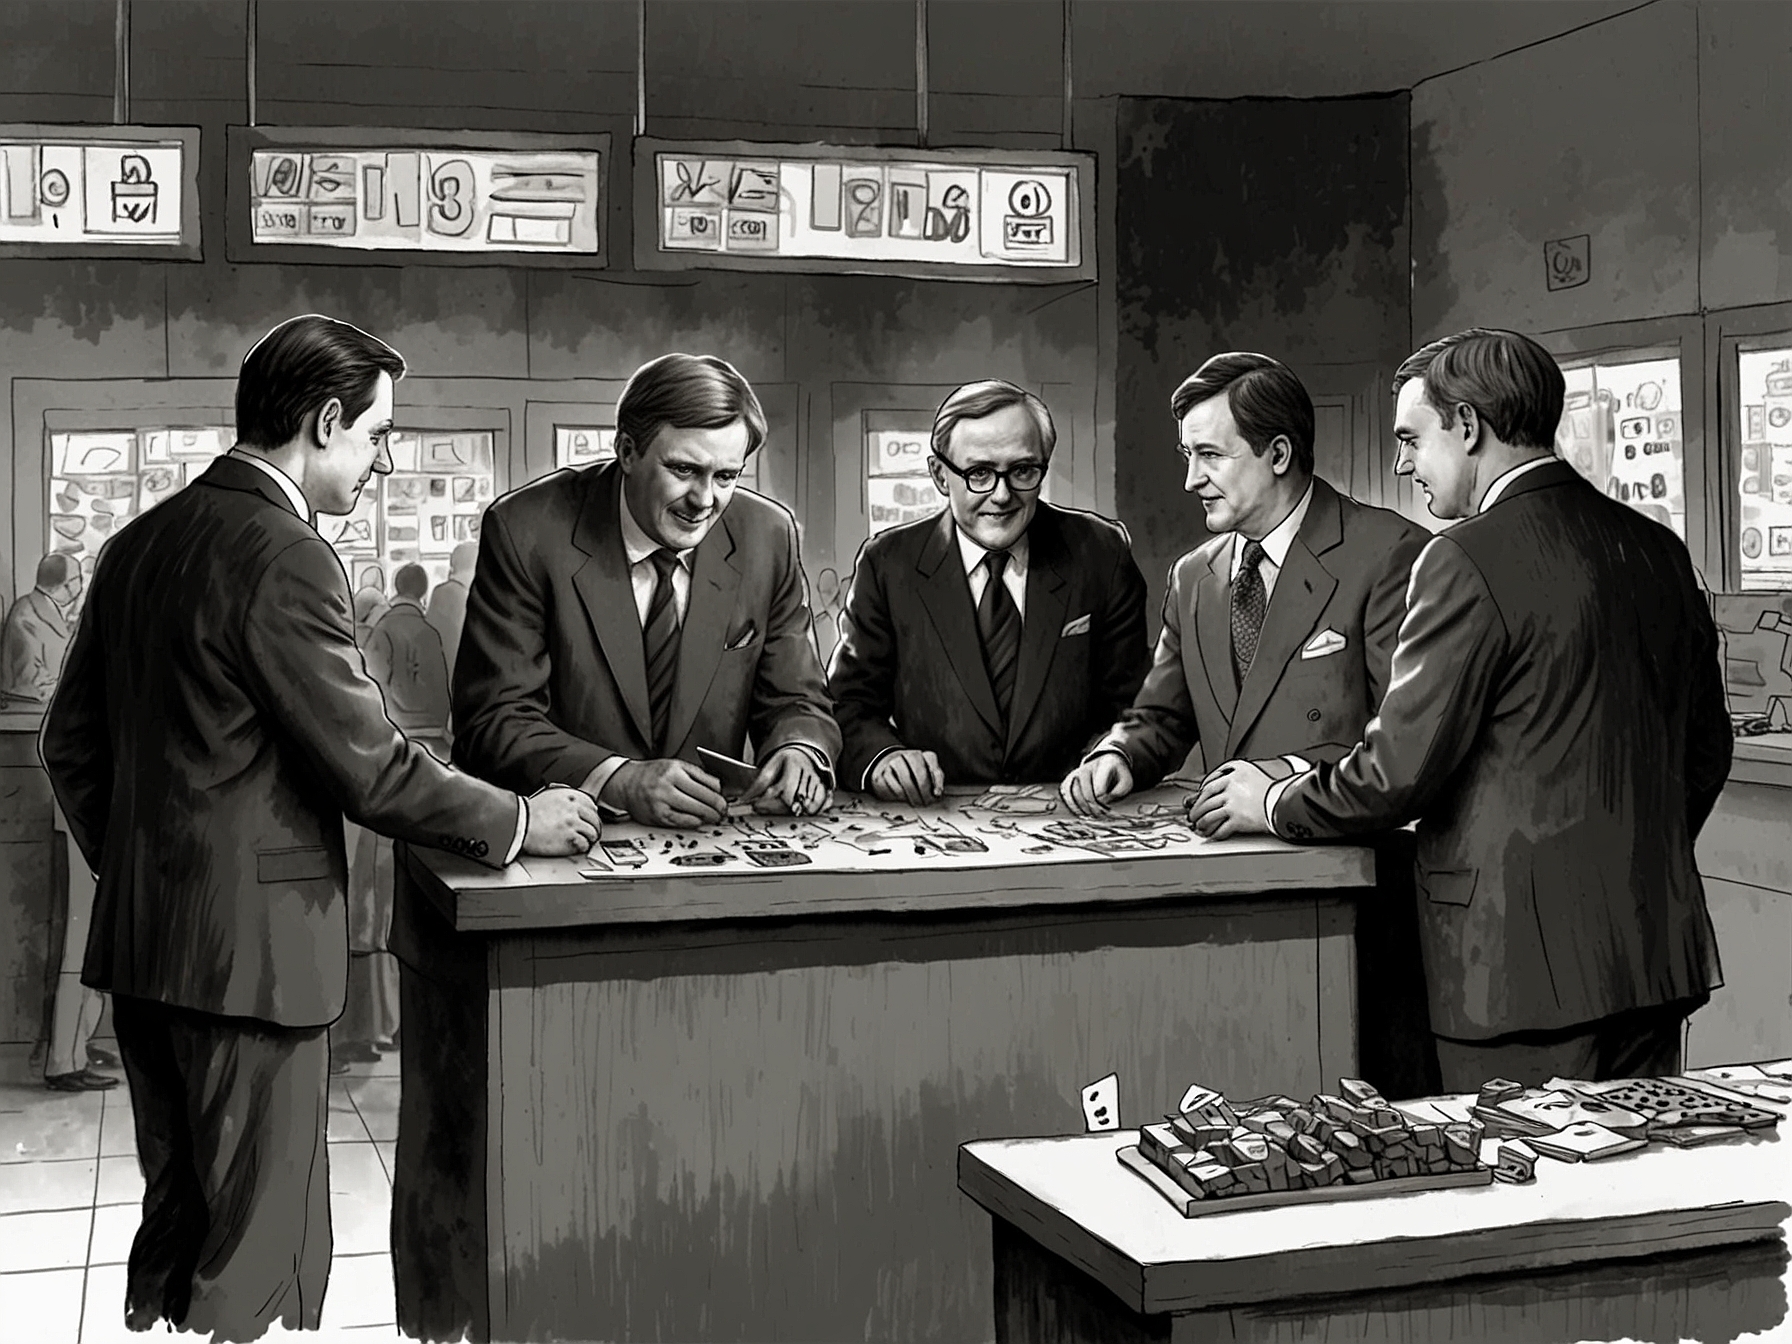 A political cartoon depicting Tory candidates and ministers placing bets at a betting booth, symbolizing the controversy over their speculation on the next general election date and raising ethical concerns.